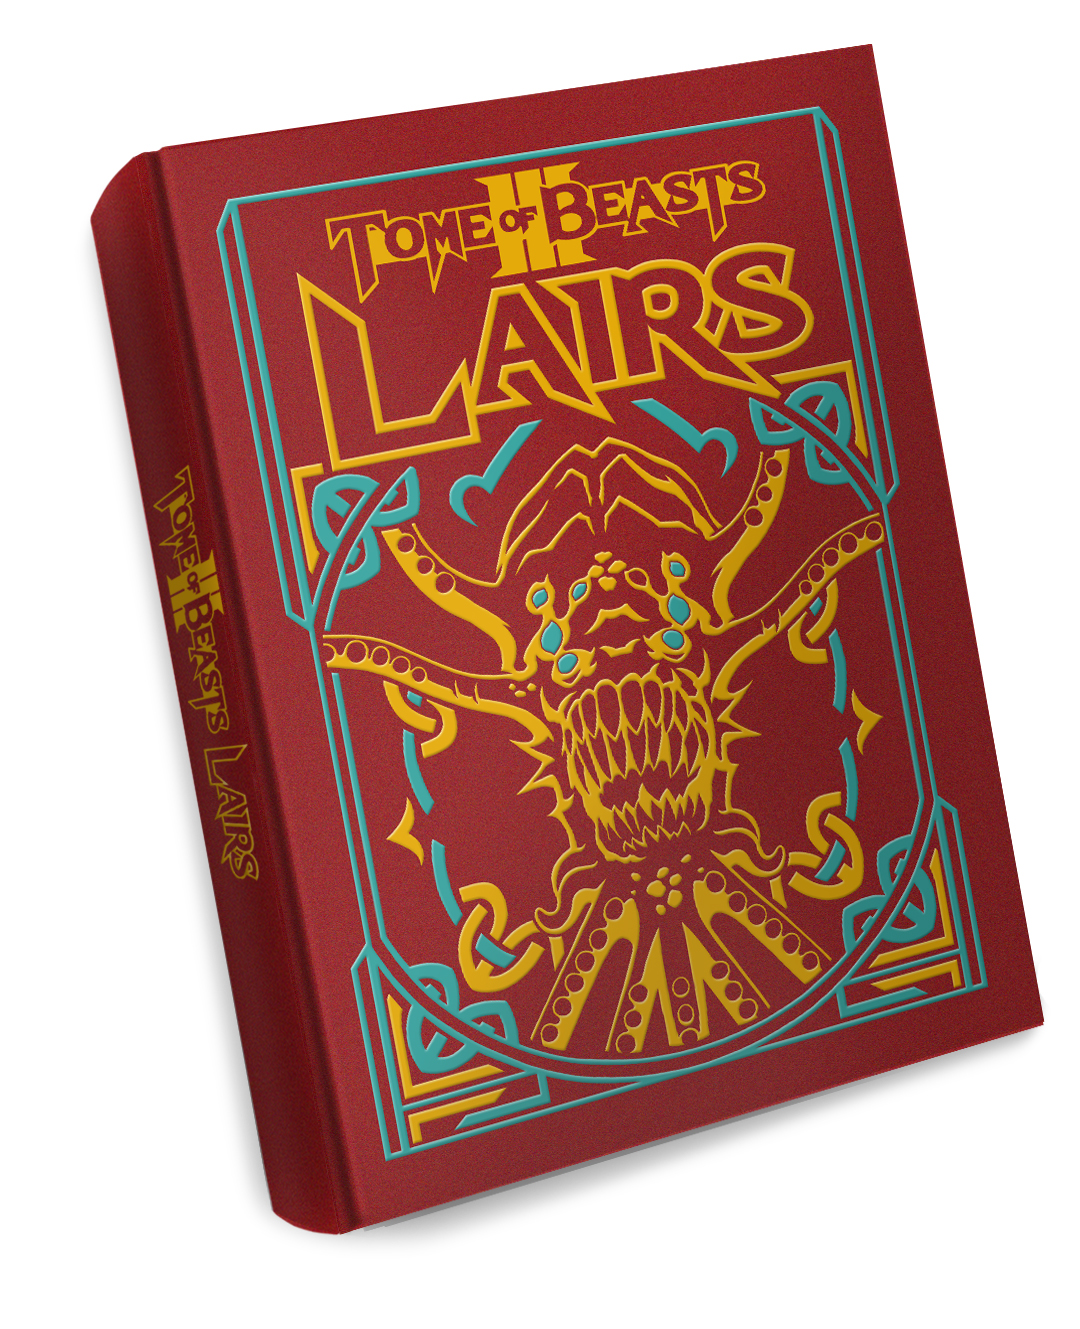 D&D 5E - Deck of Beasts Now Available (all the Kobold Press monsters on  cards)